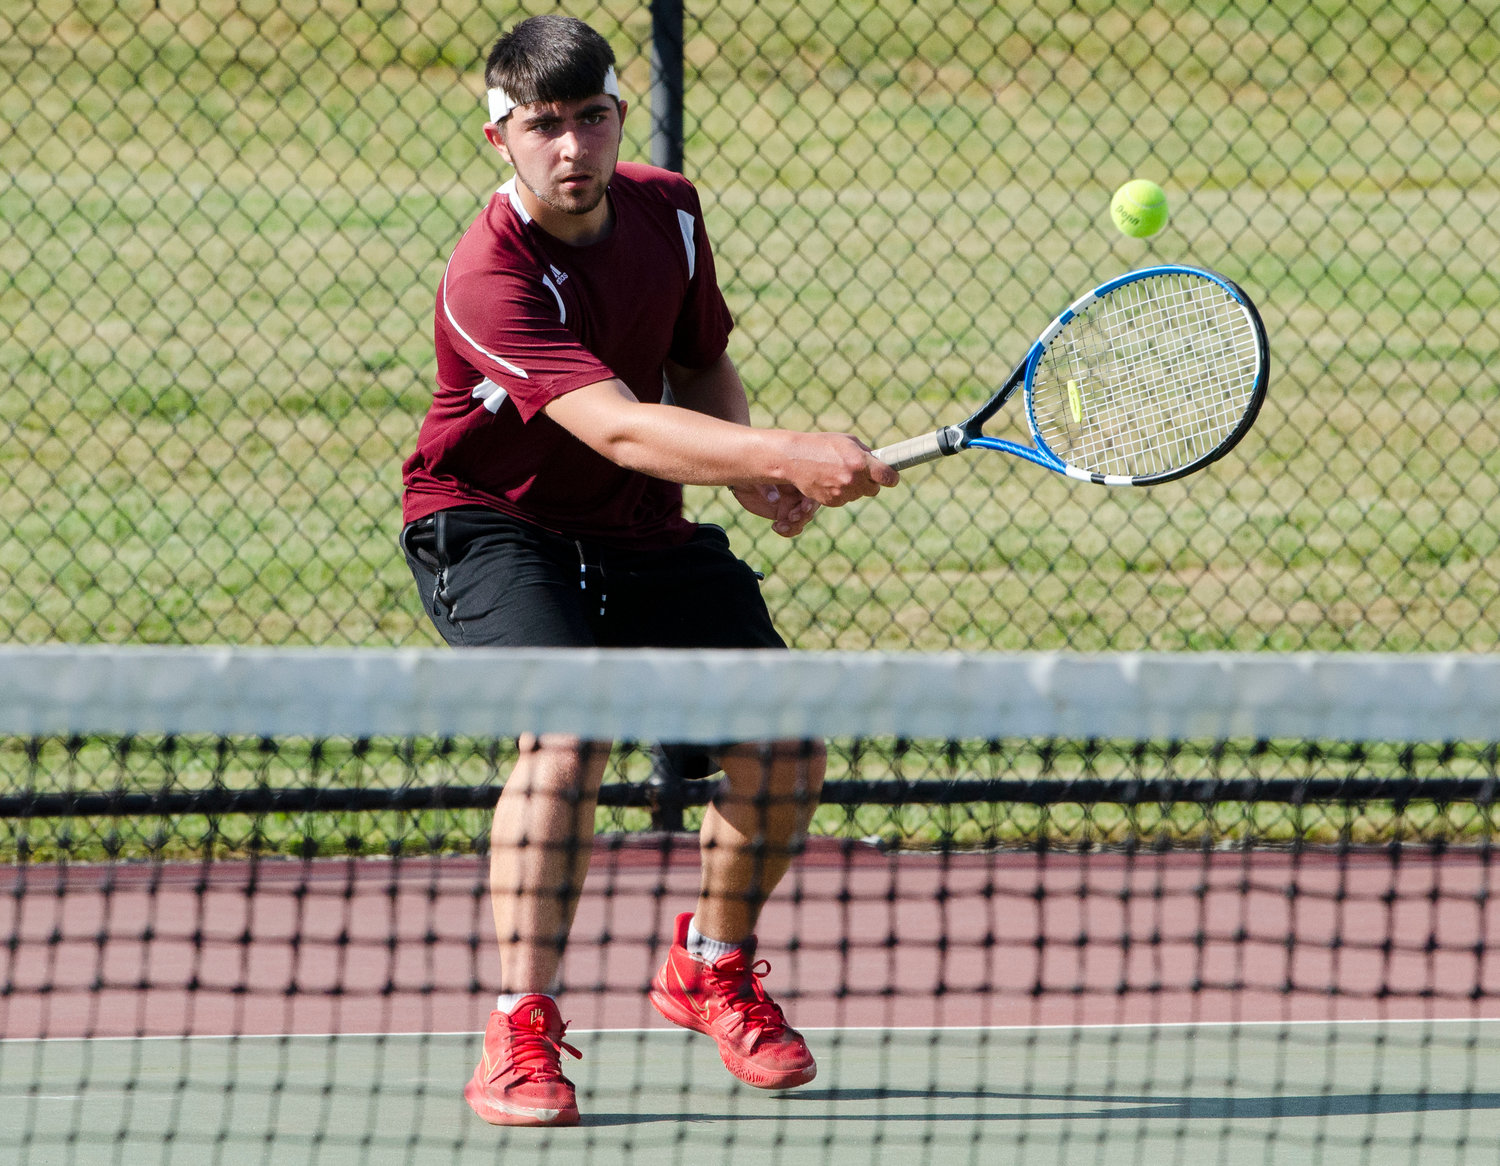 First singles player Luke Del Deo lost to Falcons Dan Meyerson, 2-6, 3-6.